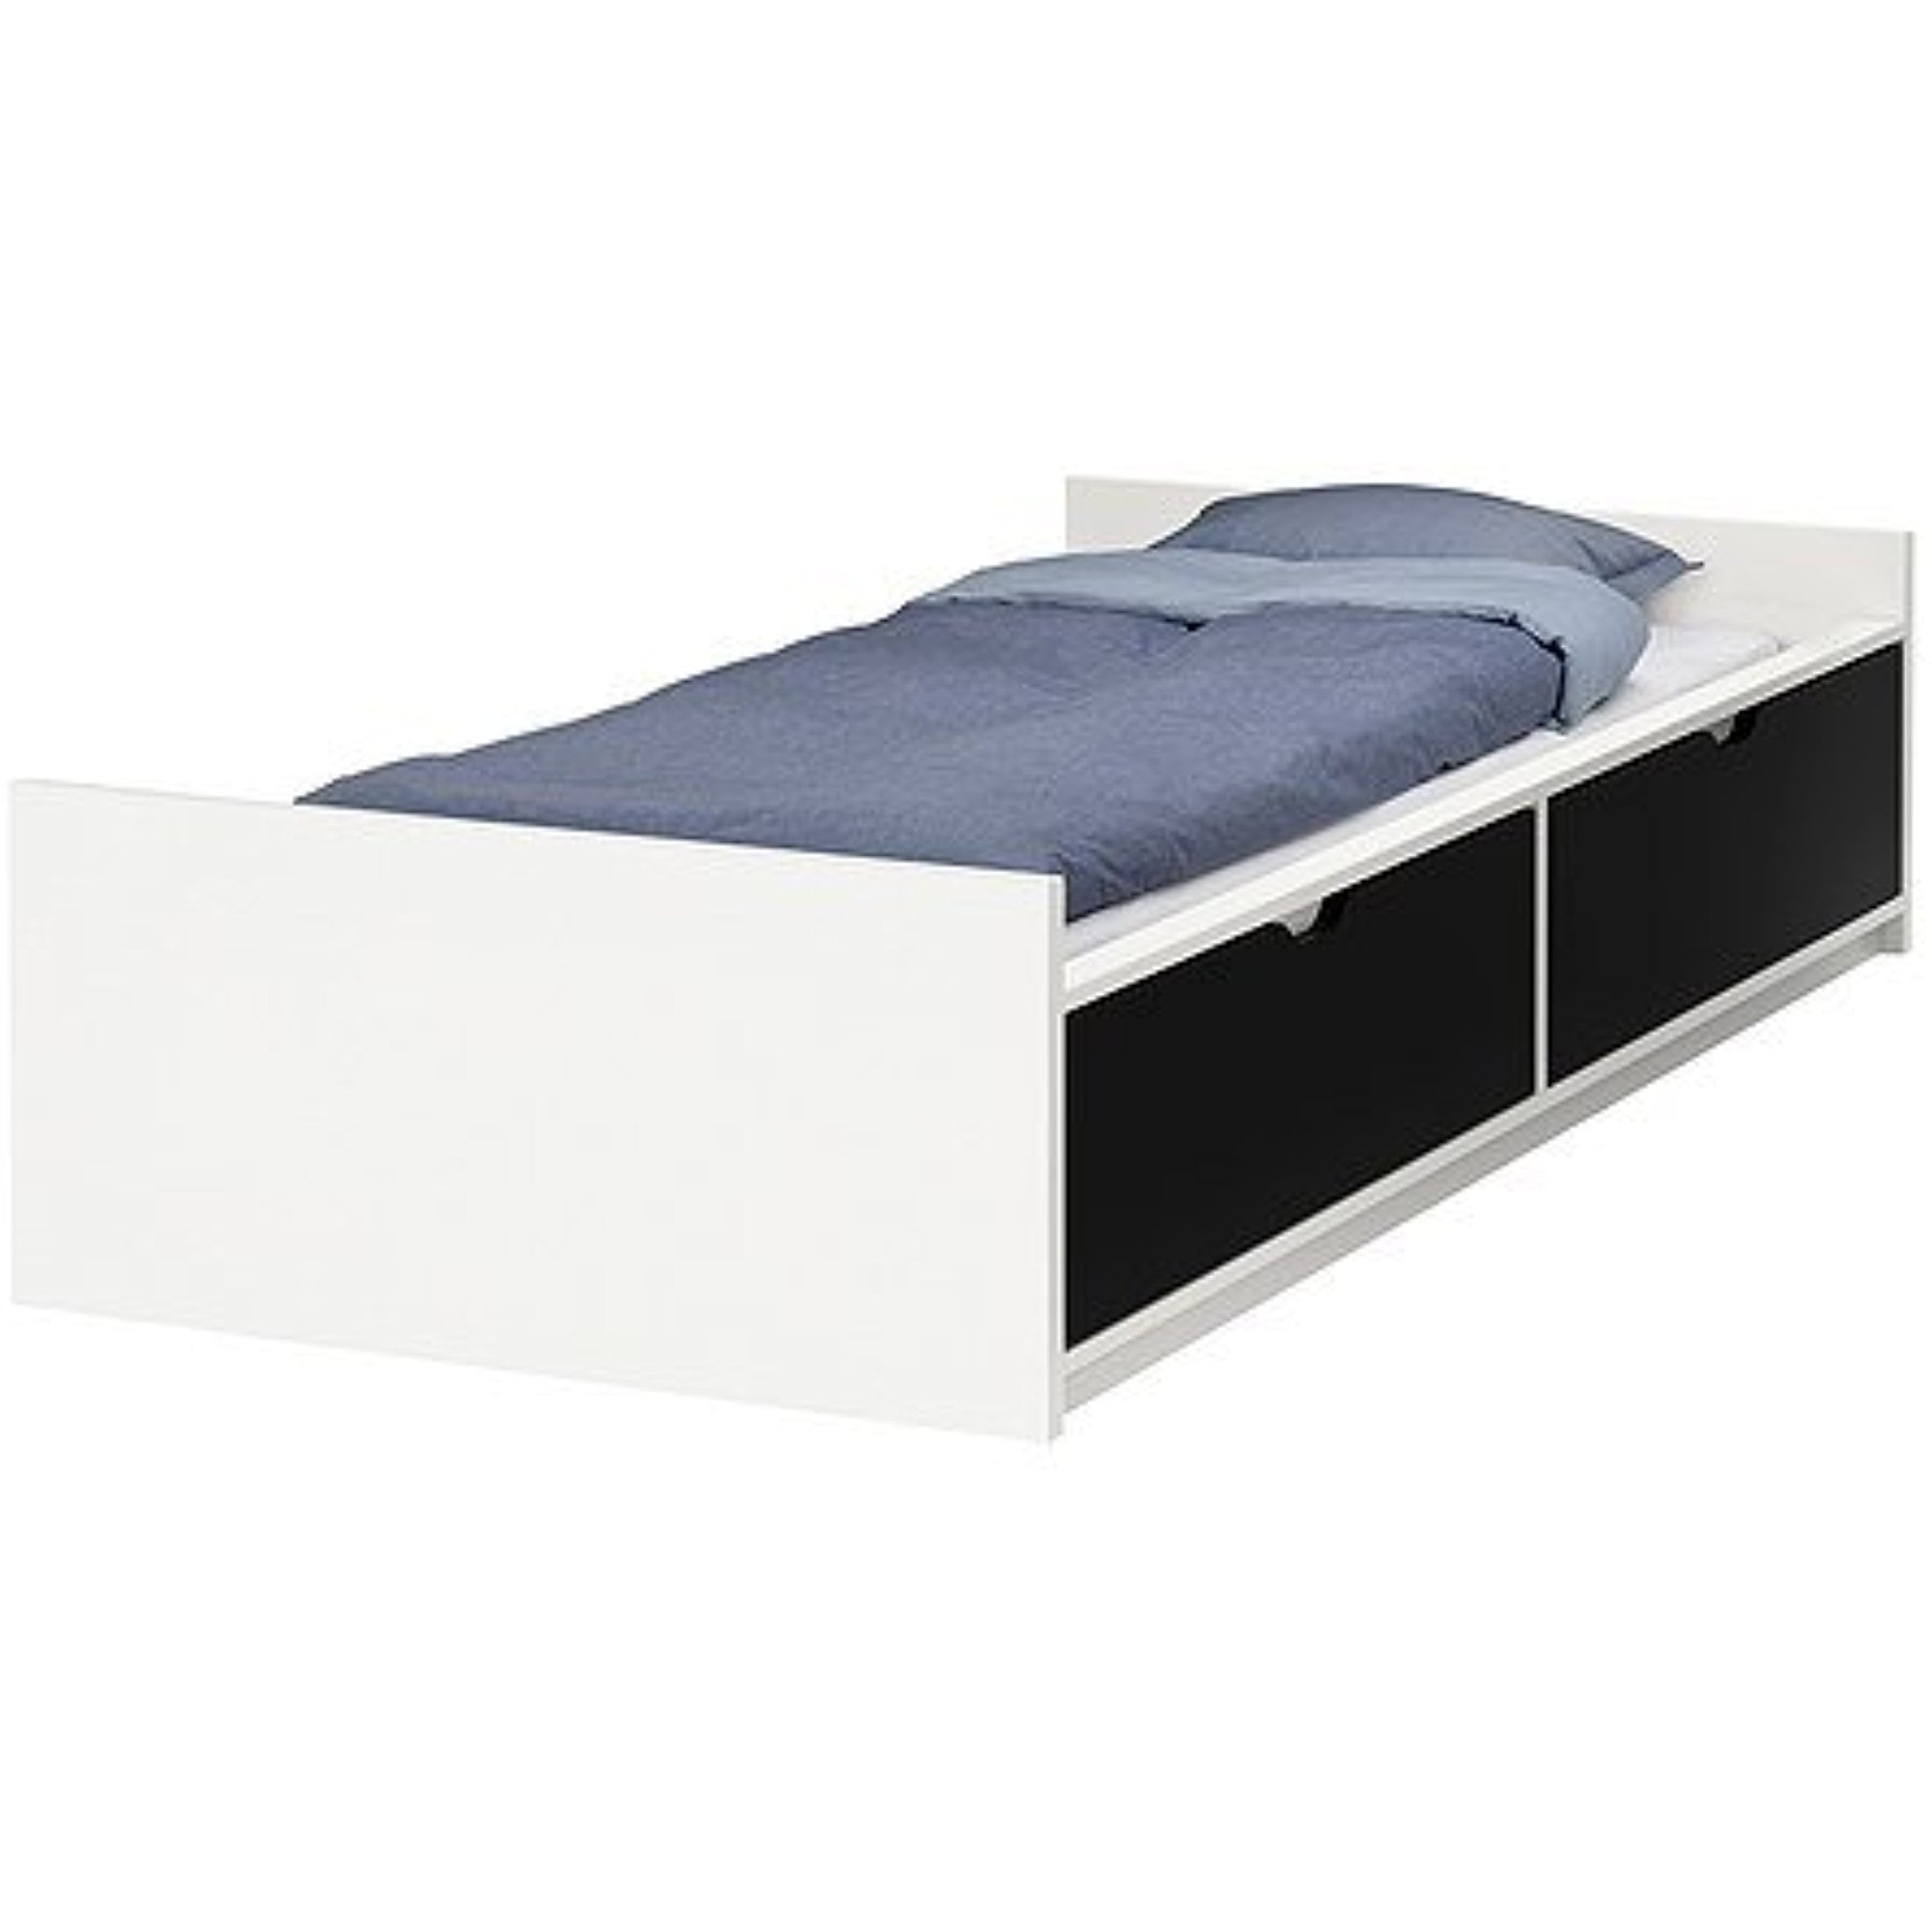 Ikea Twin Size Bed Frame W, Cal King Bed Frame With Storage Ikea